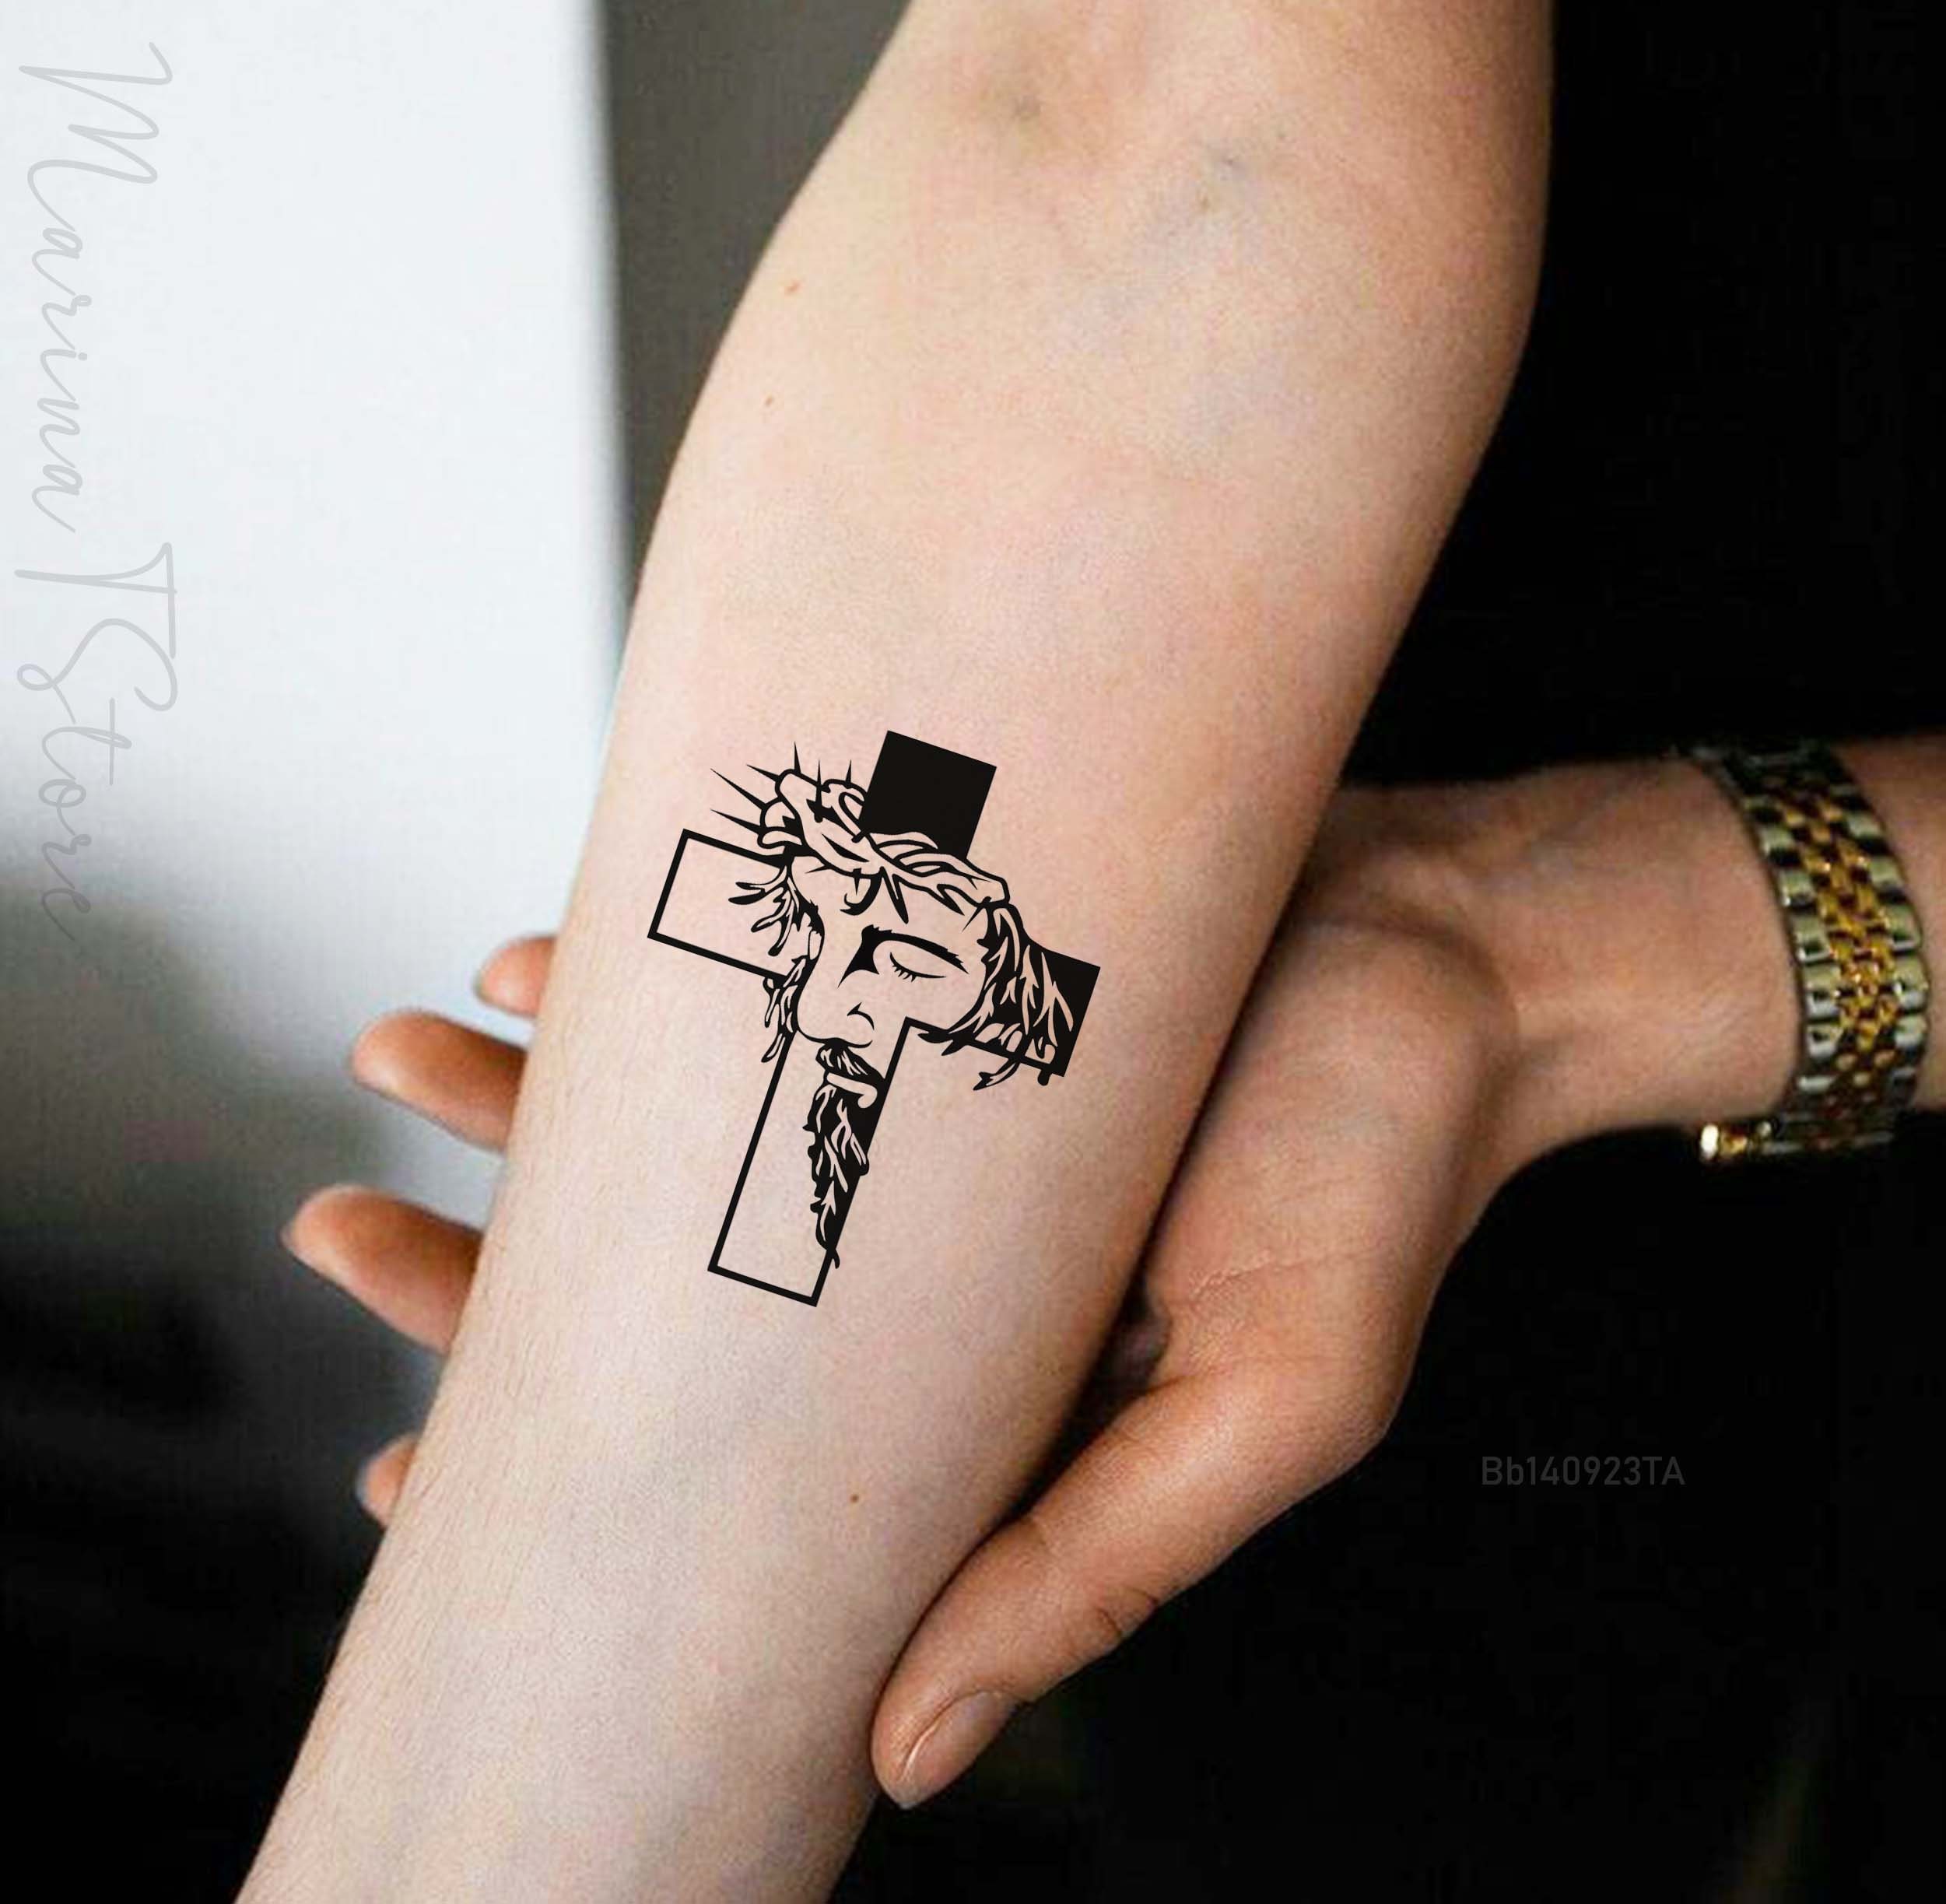 60 Holy Jesus tattoos to Express Your Faith | Art and Design